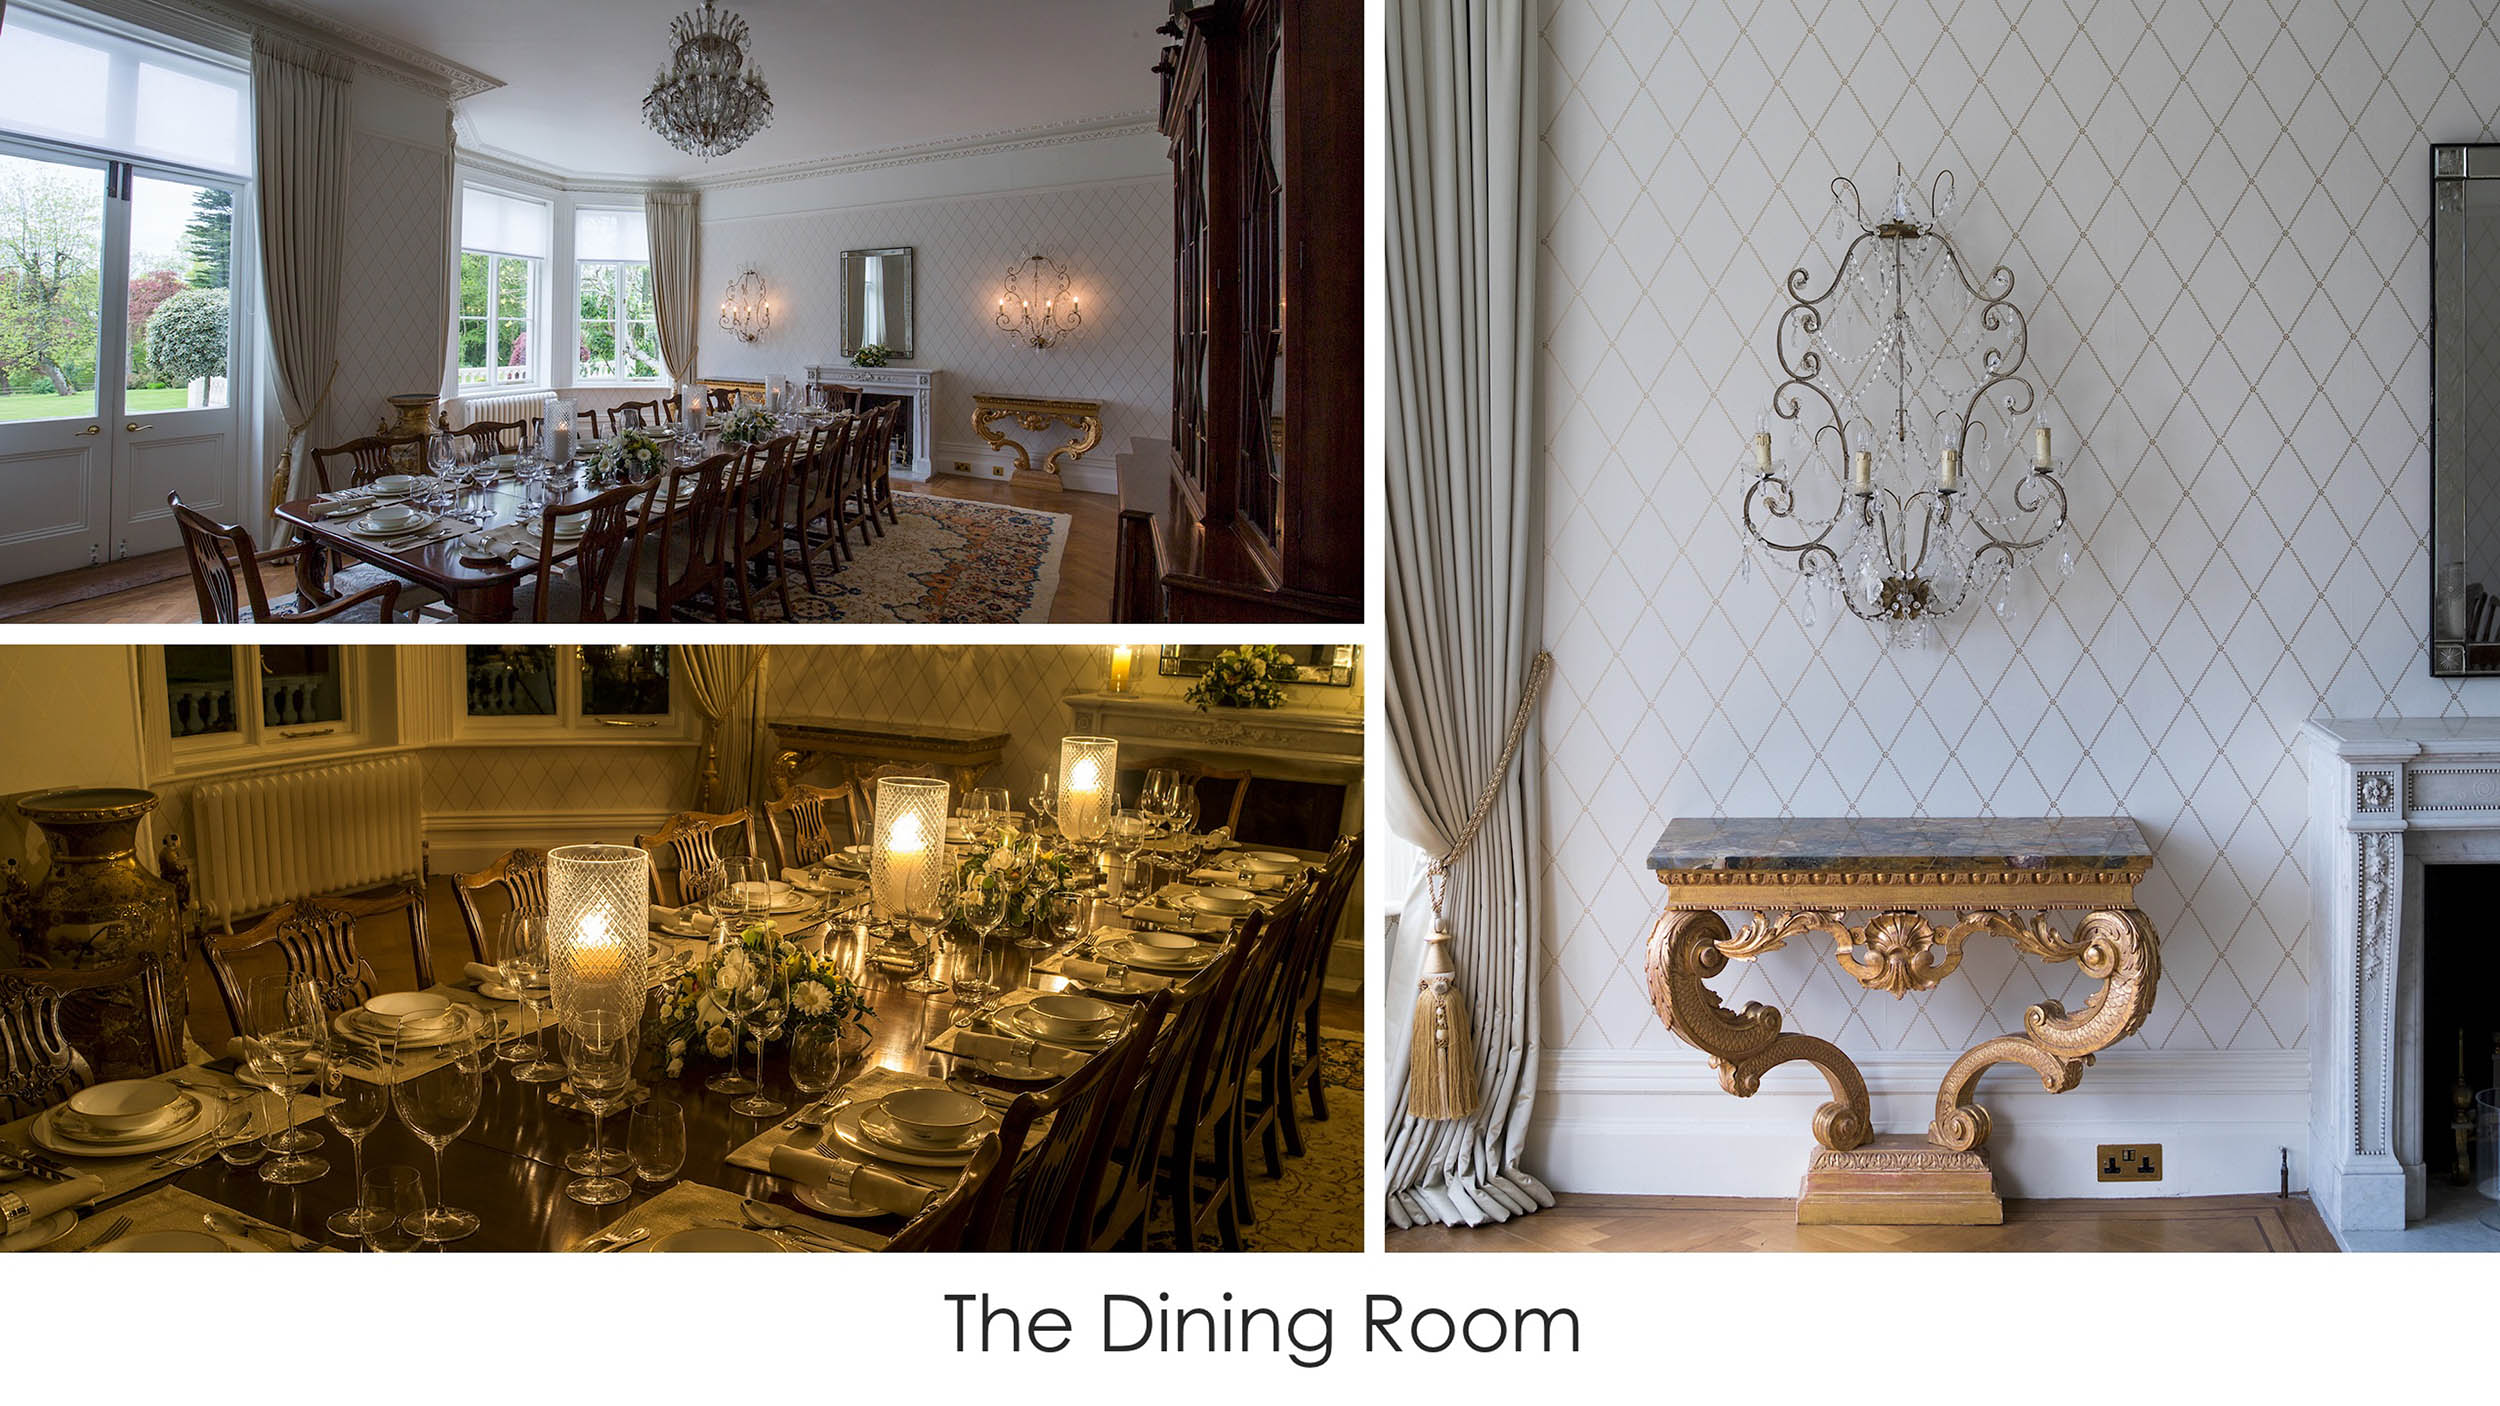 The Dining Room - Pennybridge House - Real Estate Development Projects by Gabriella Atkinson.